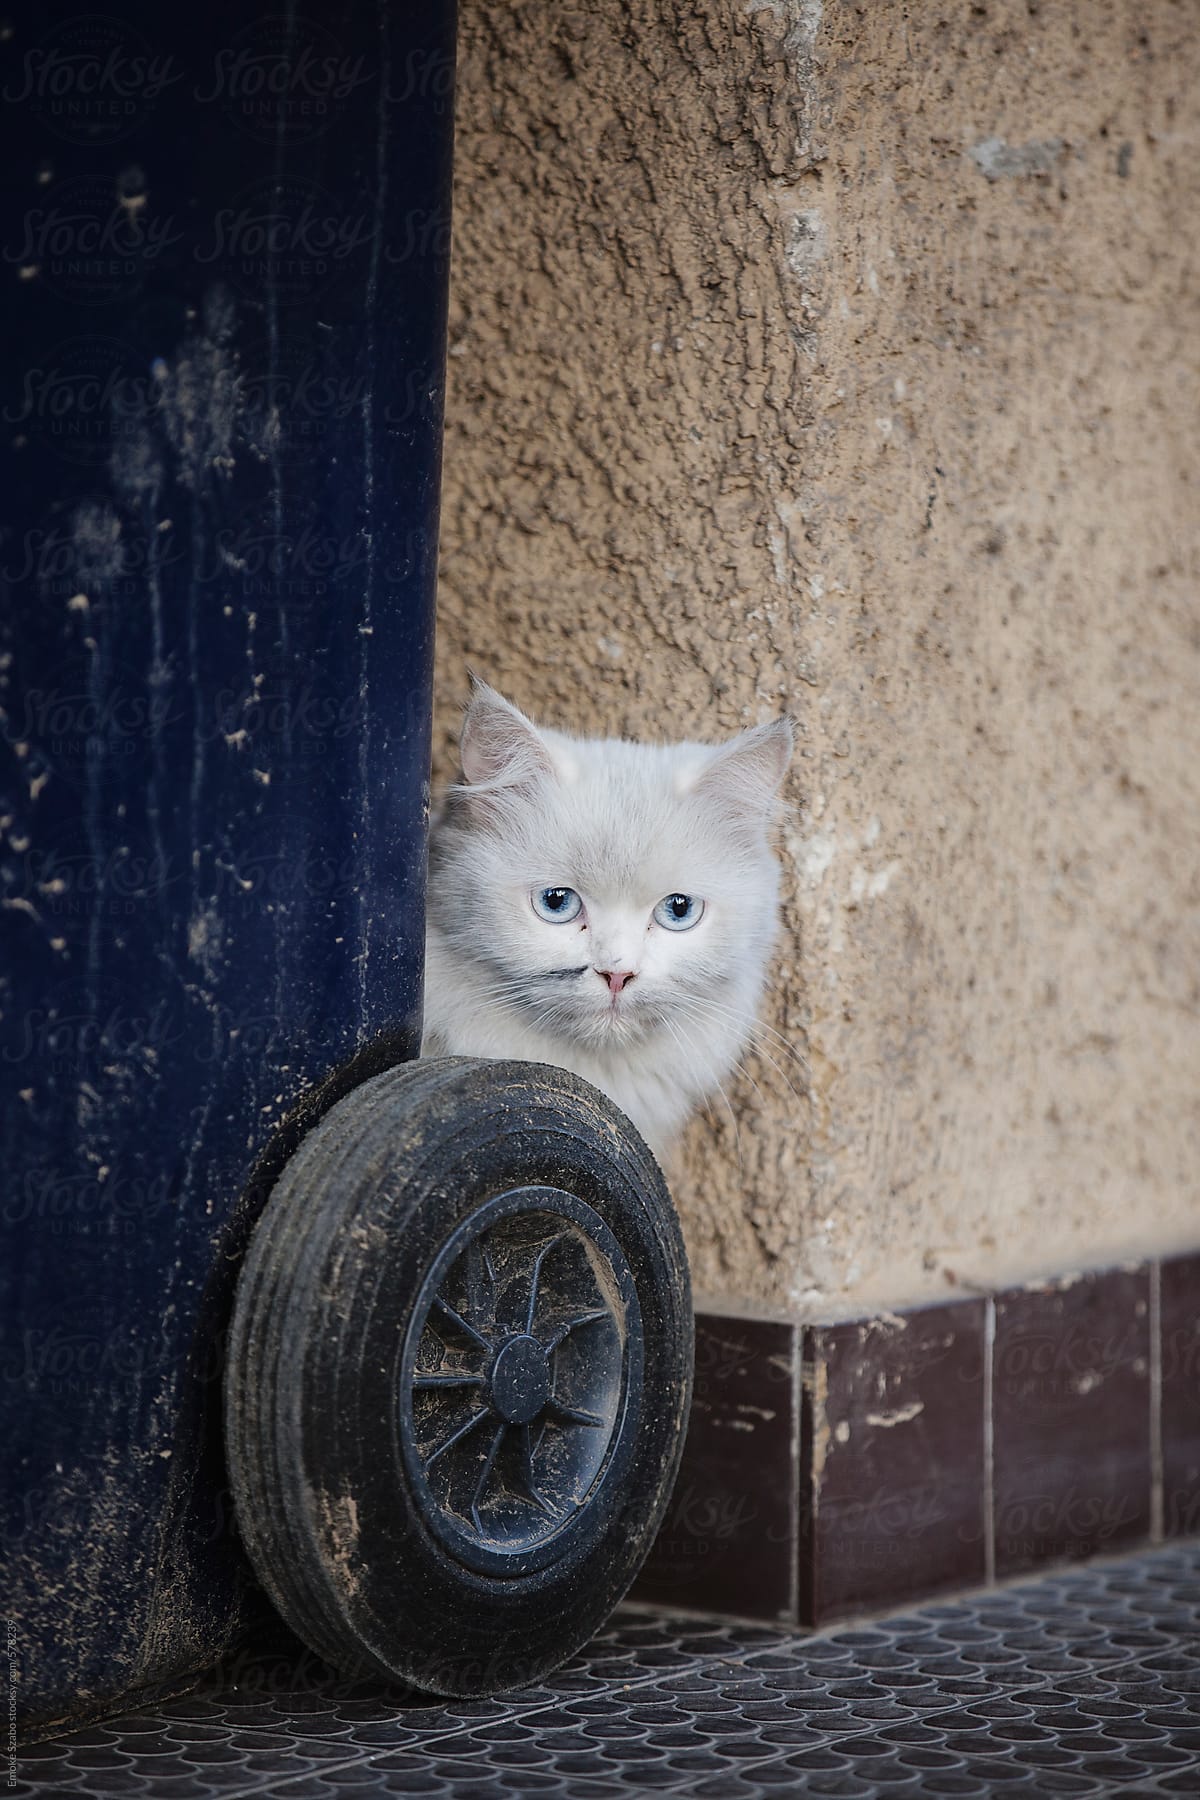 White fluffy cat with blue eyes